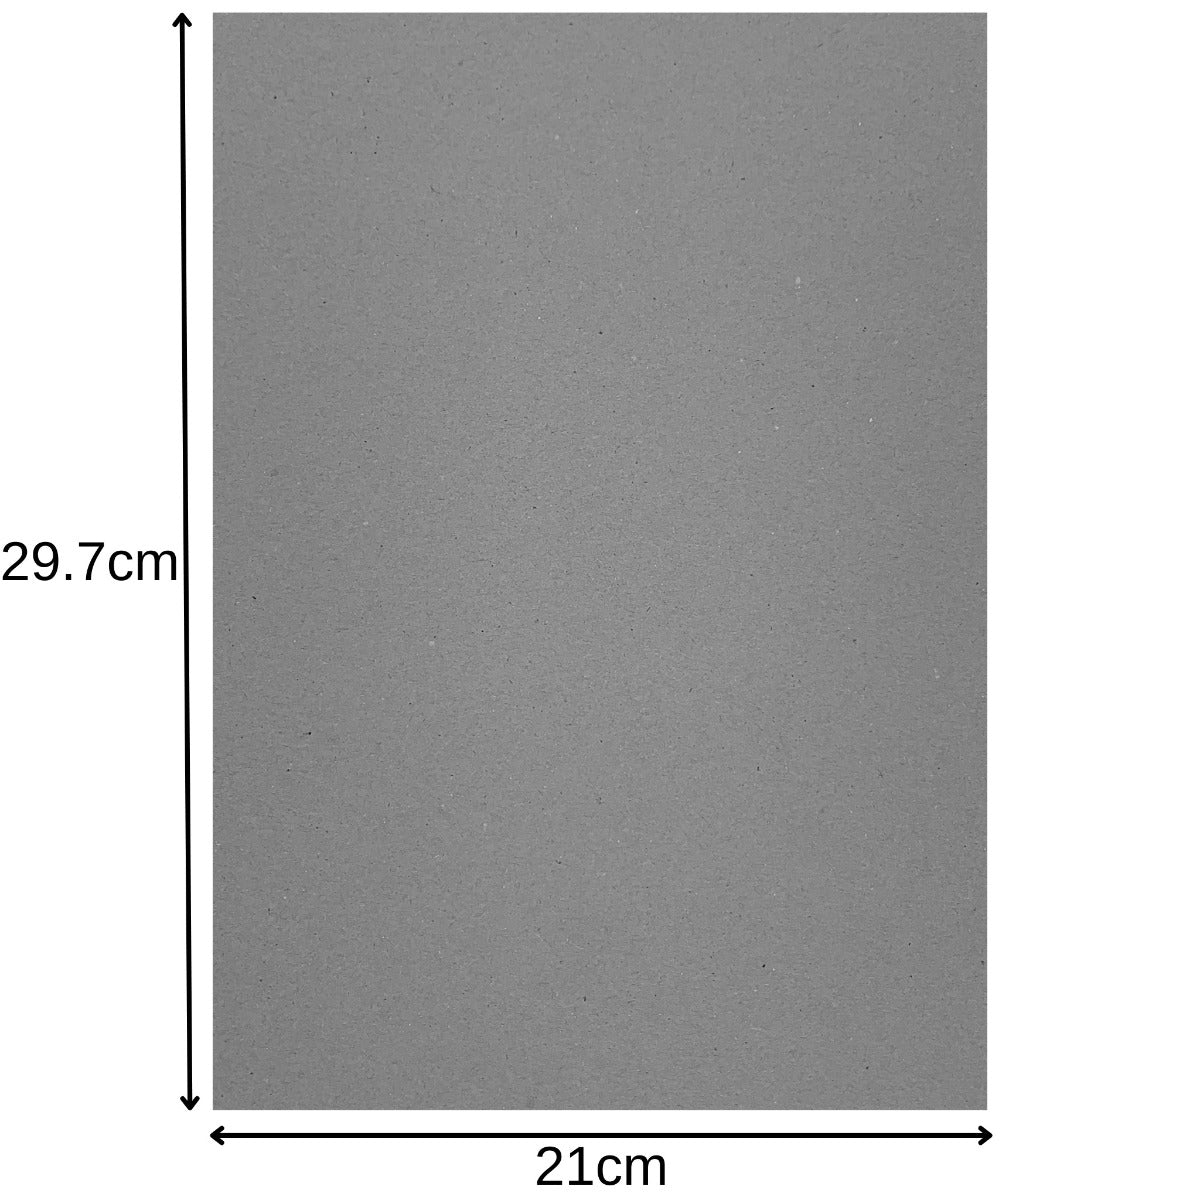 A4 Greyboard Sheets 1000 Micron Recycled Card Strong Modelling & Backing Card Choose Quantity